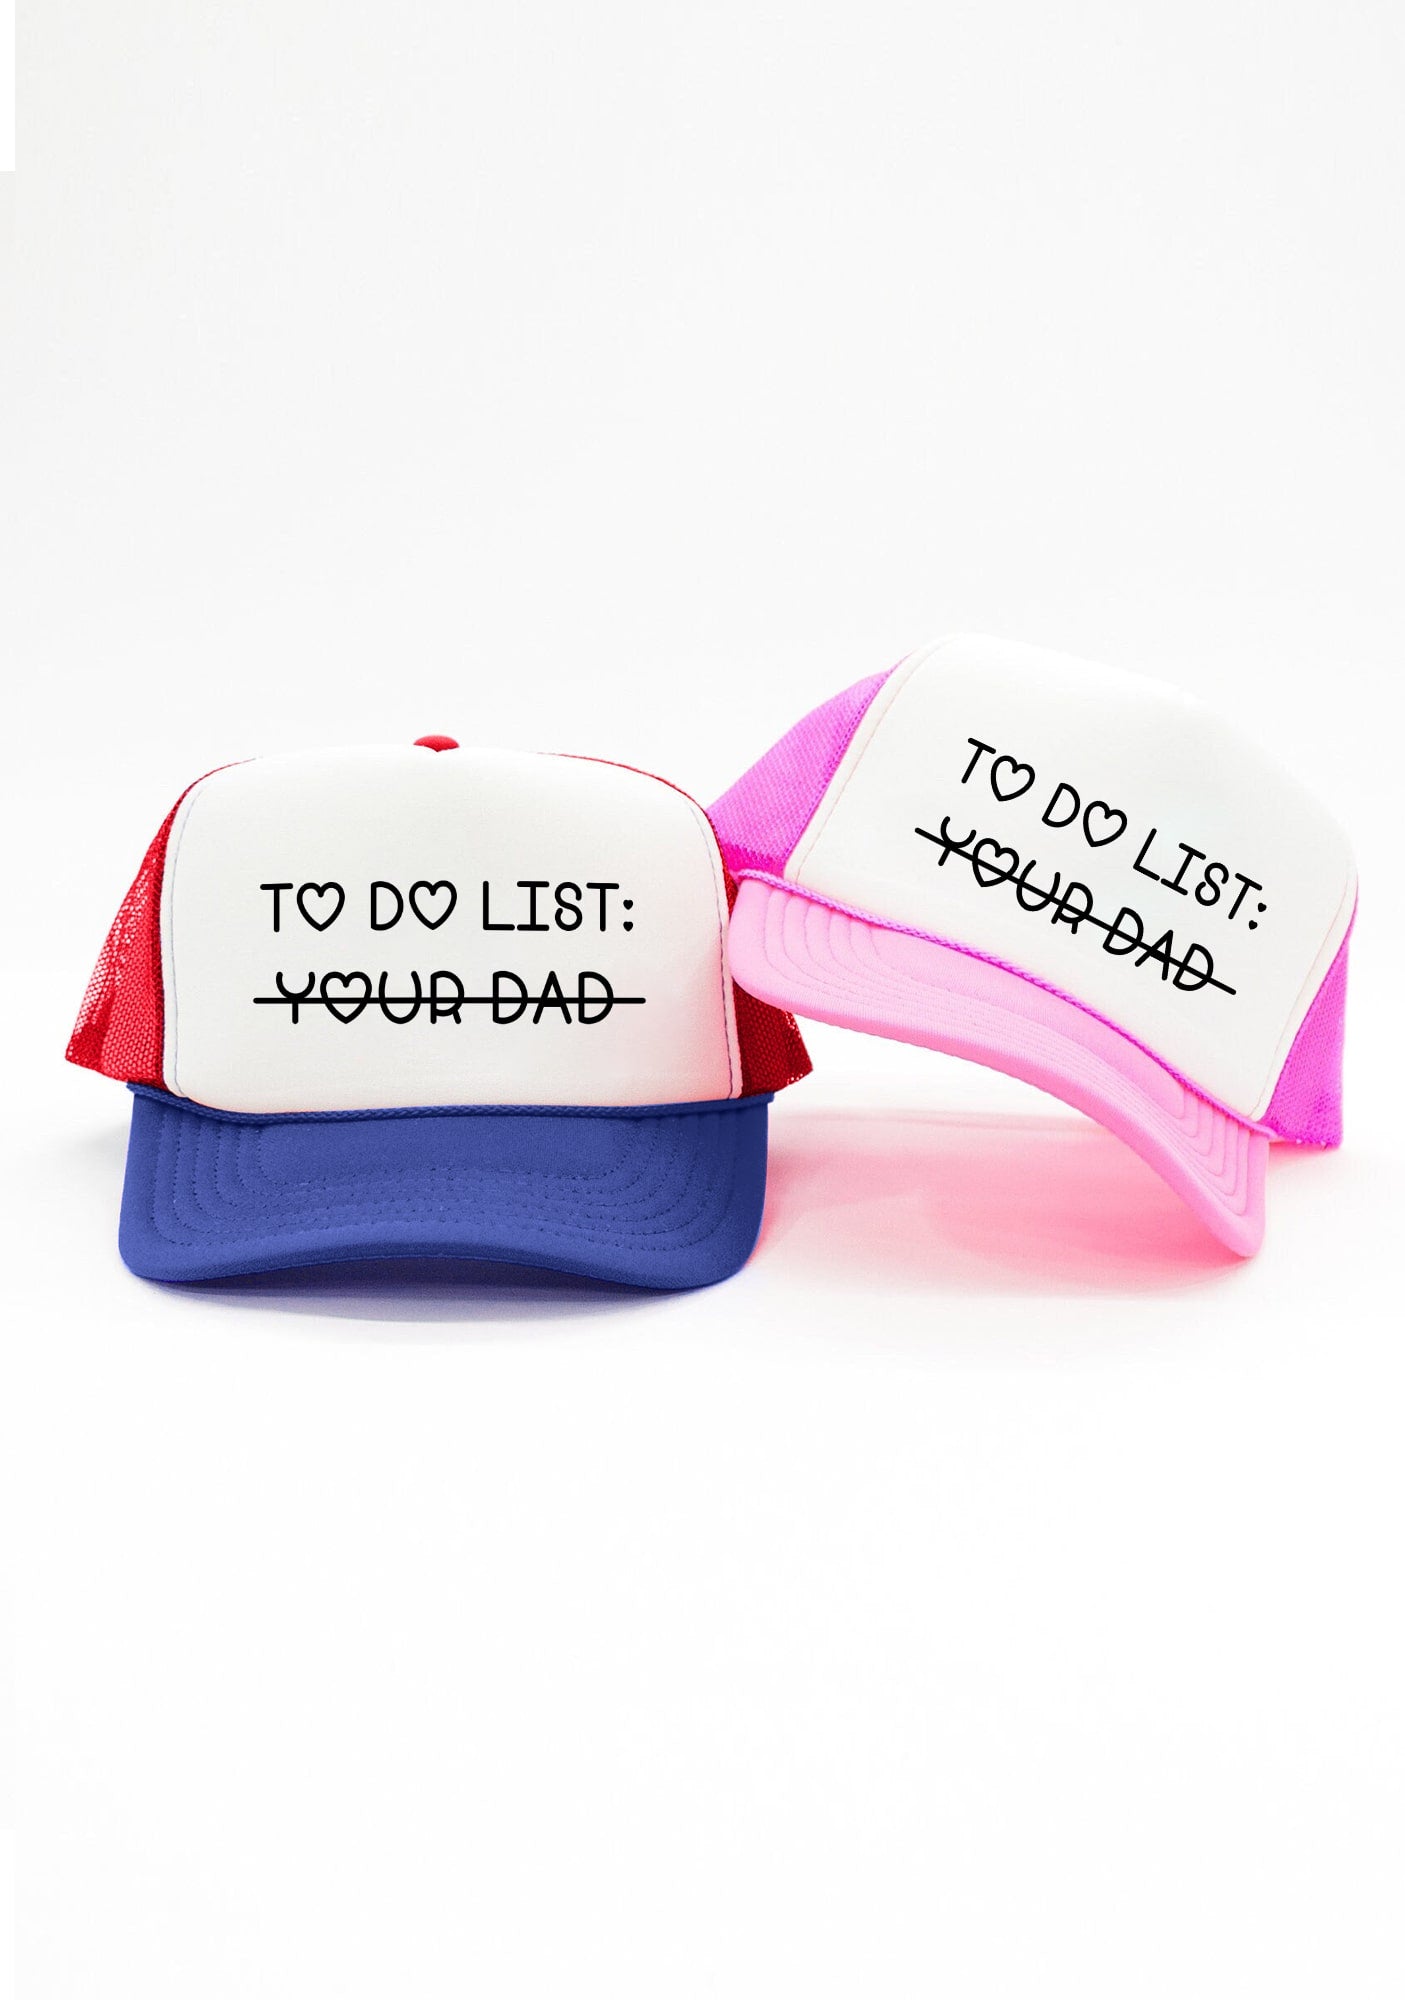 To Do List Your Dad Trucker Hat